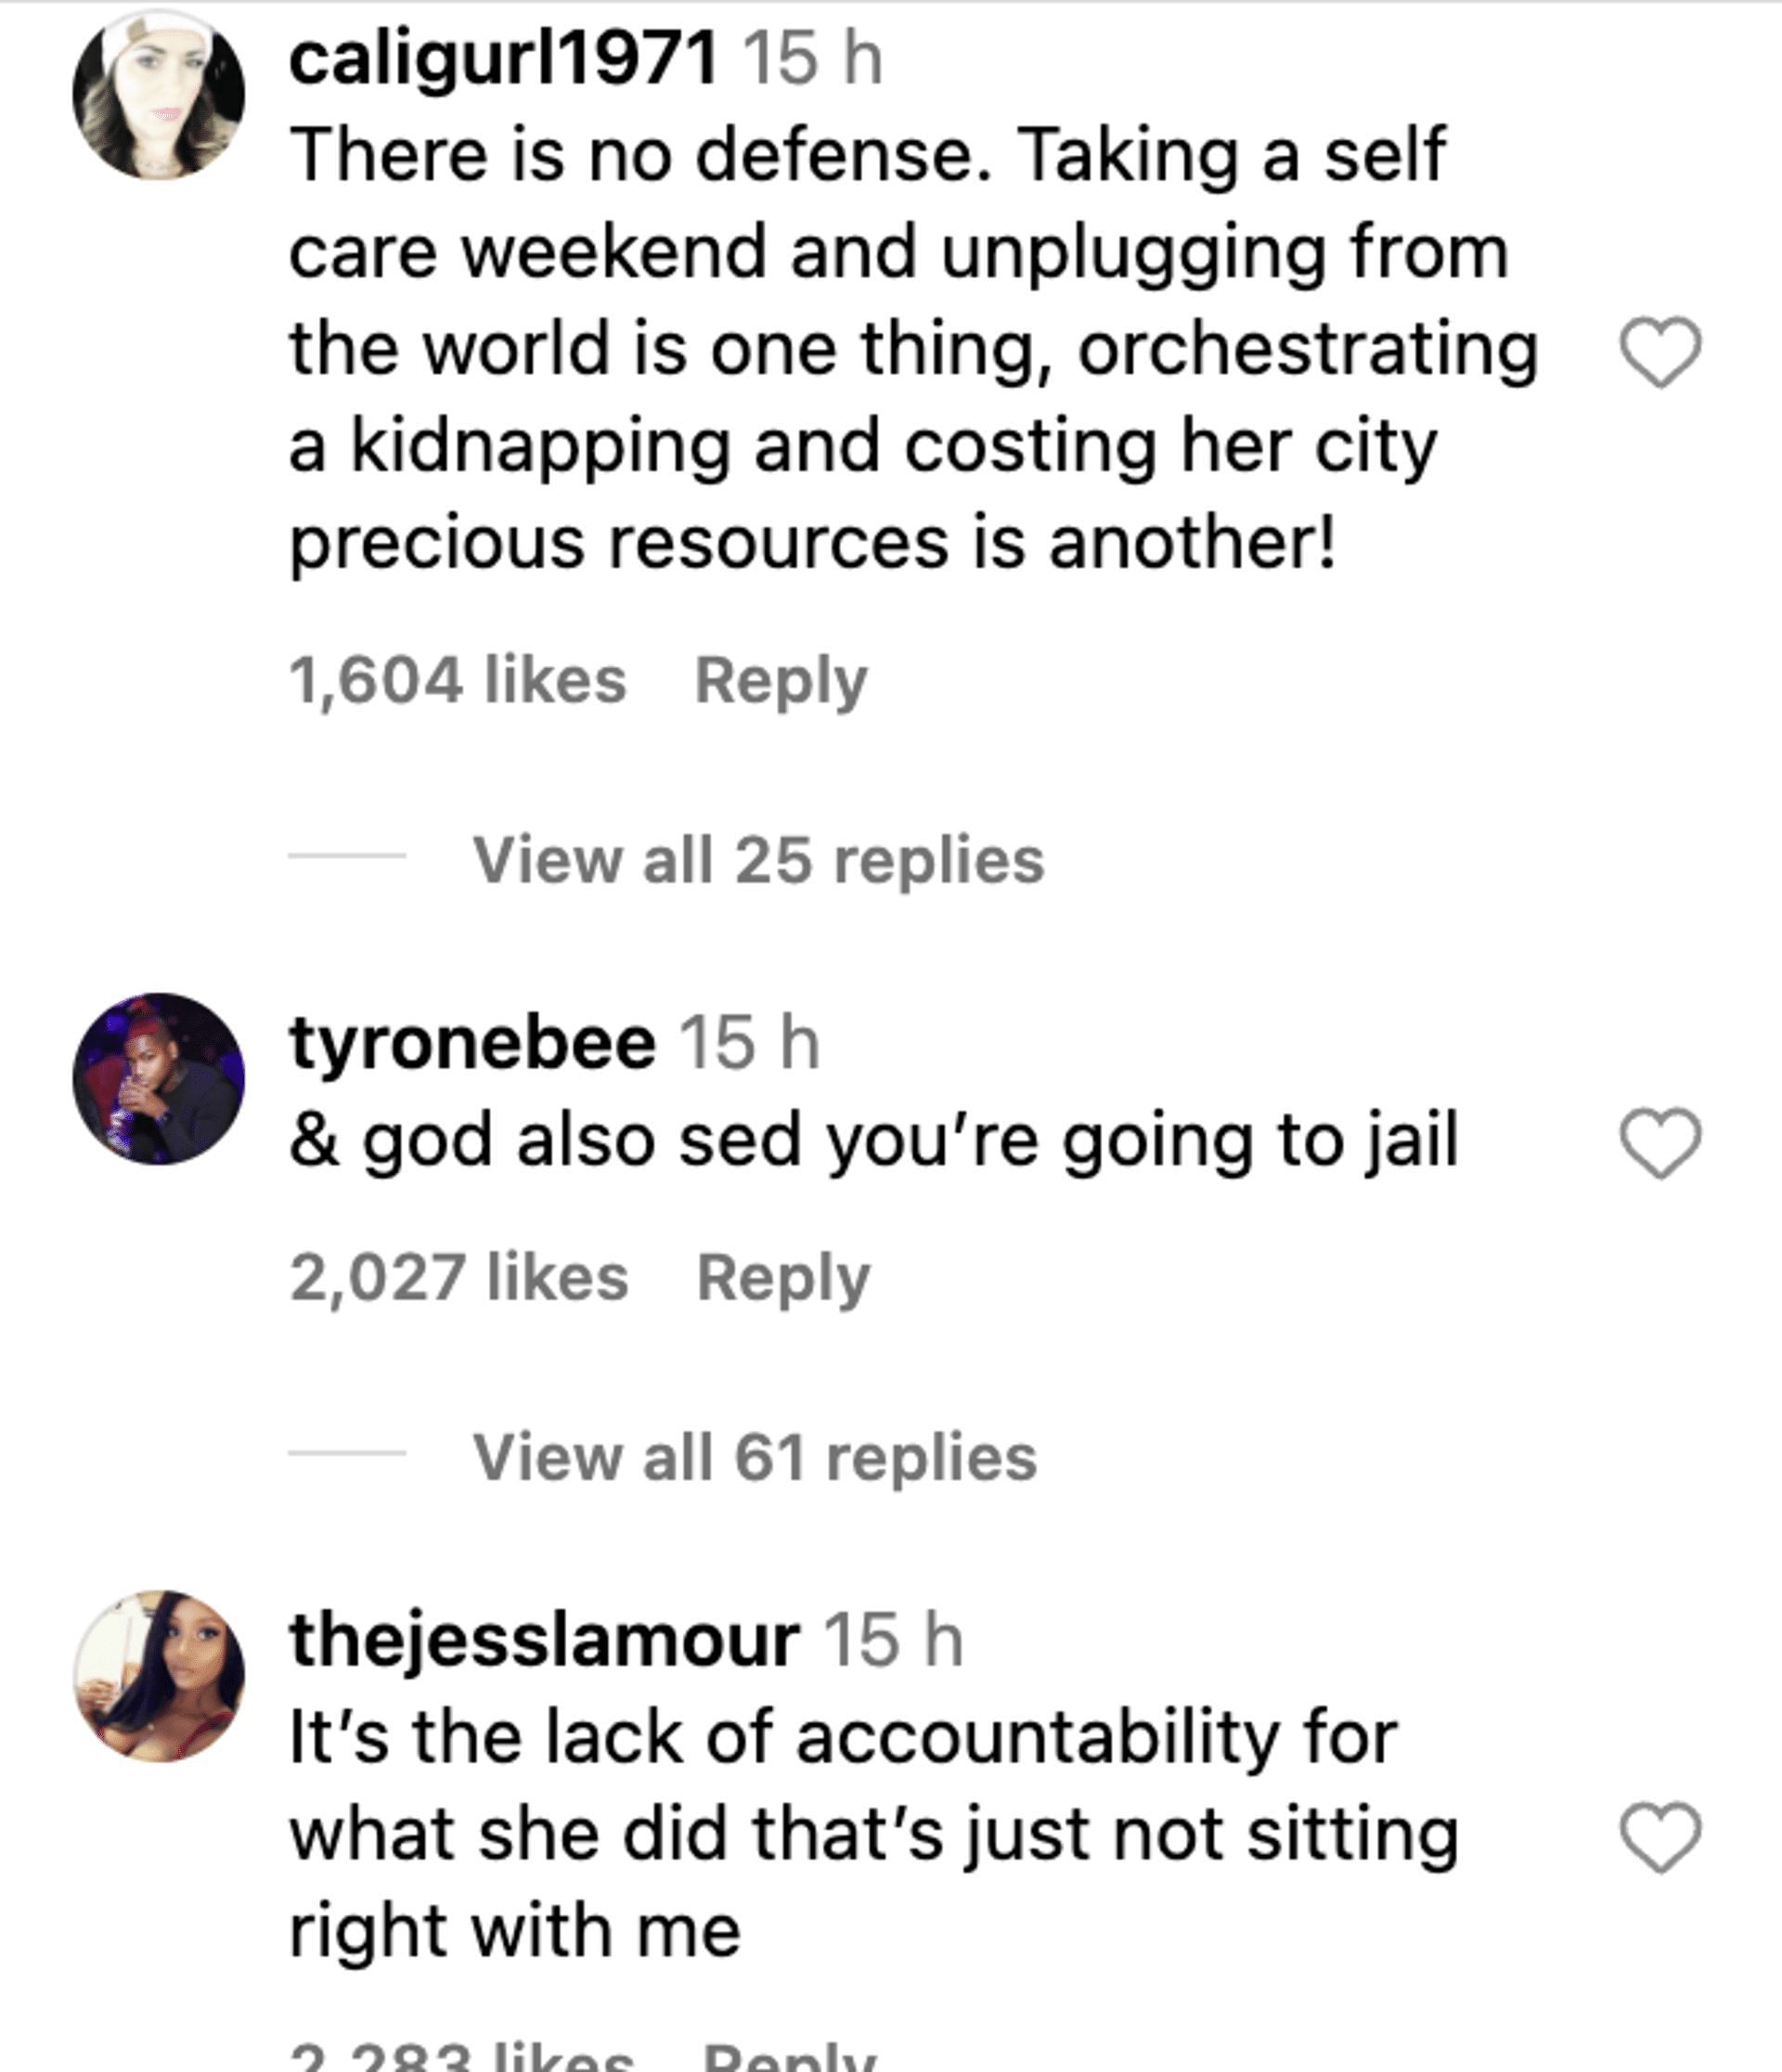 Social media users troll Russell after she makes an alleged comeback to Twitter after reportedly going missing for 49 hours. (Image via Instagram)